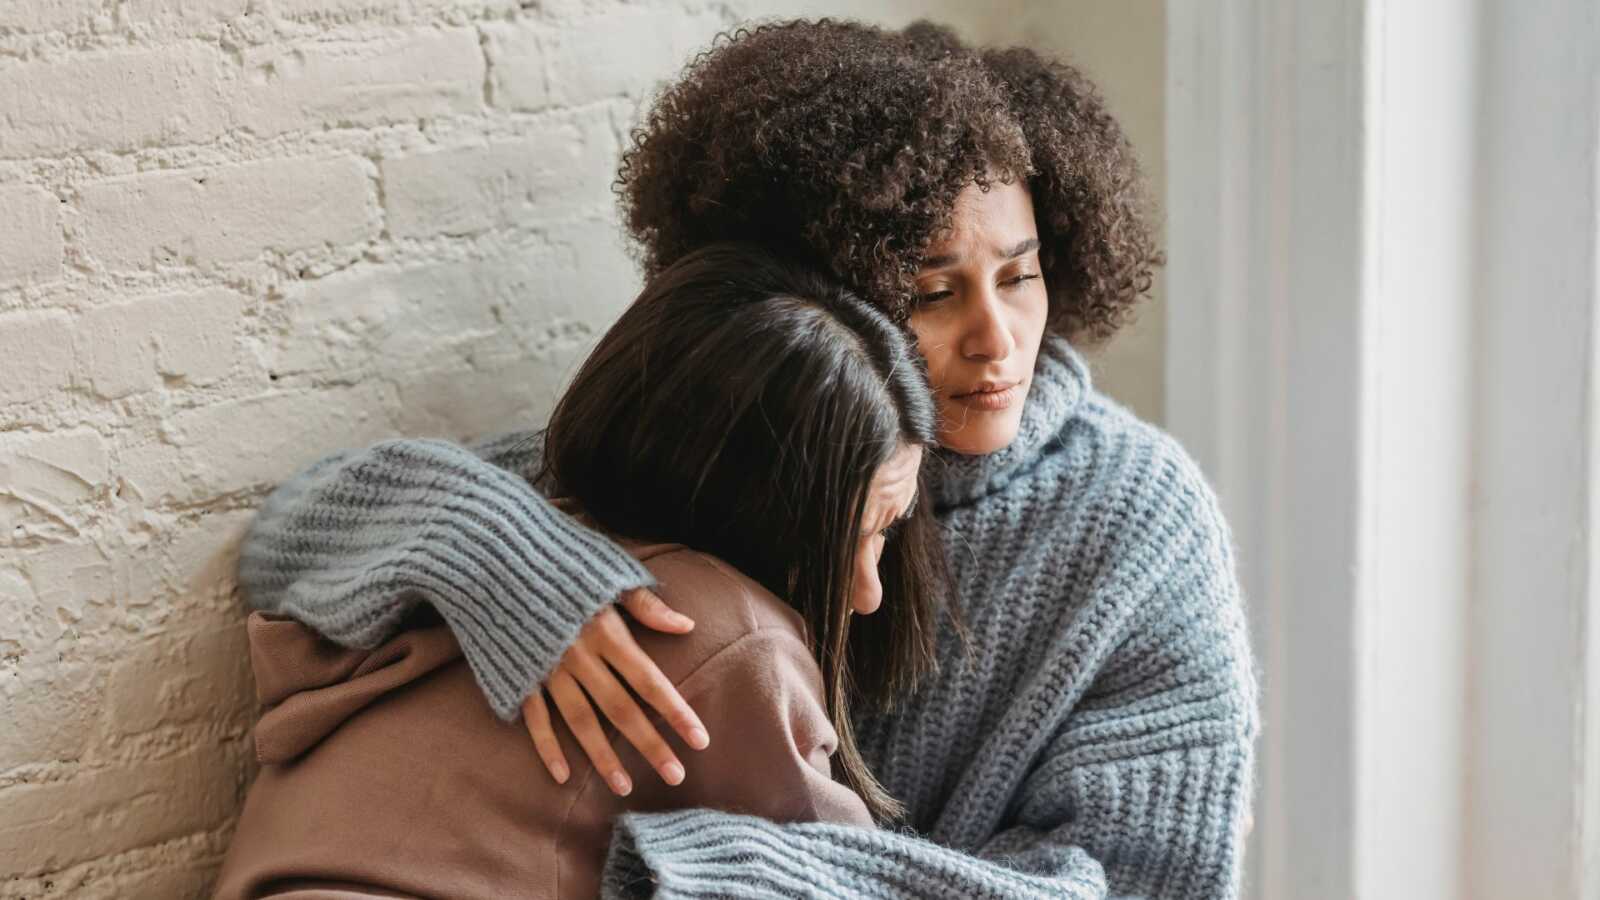 Woman hugs another woman against white brick wall